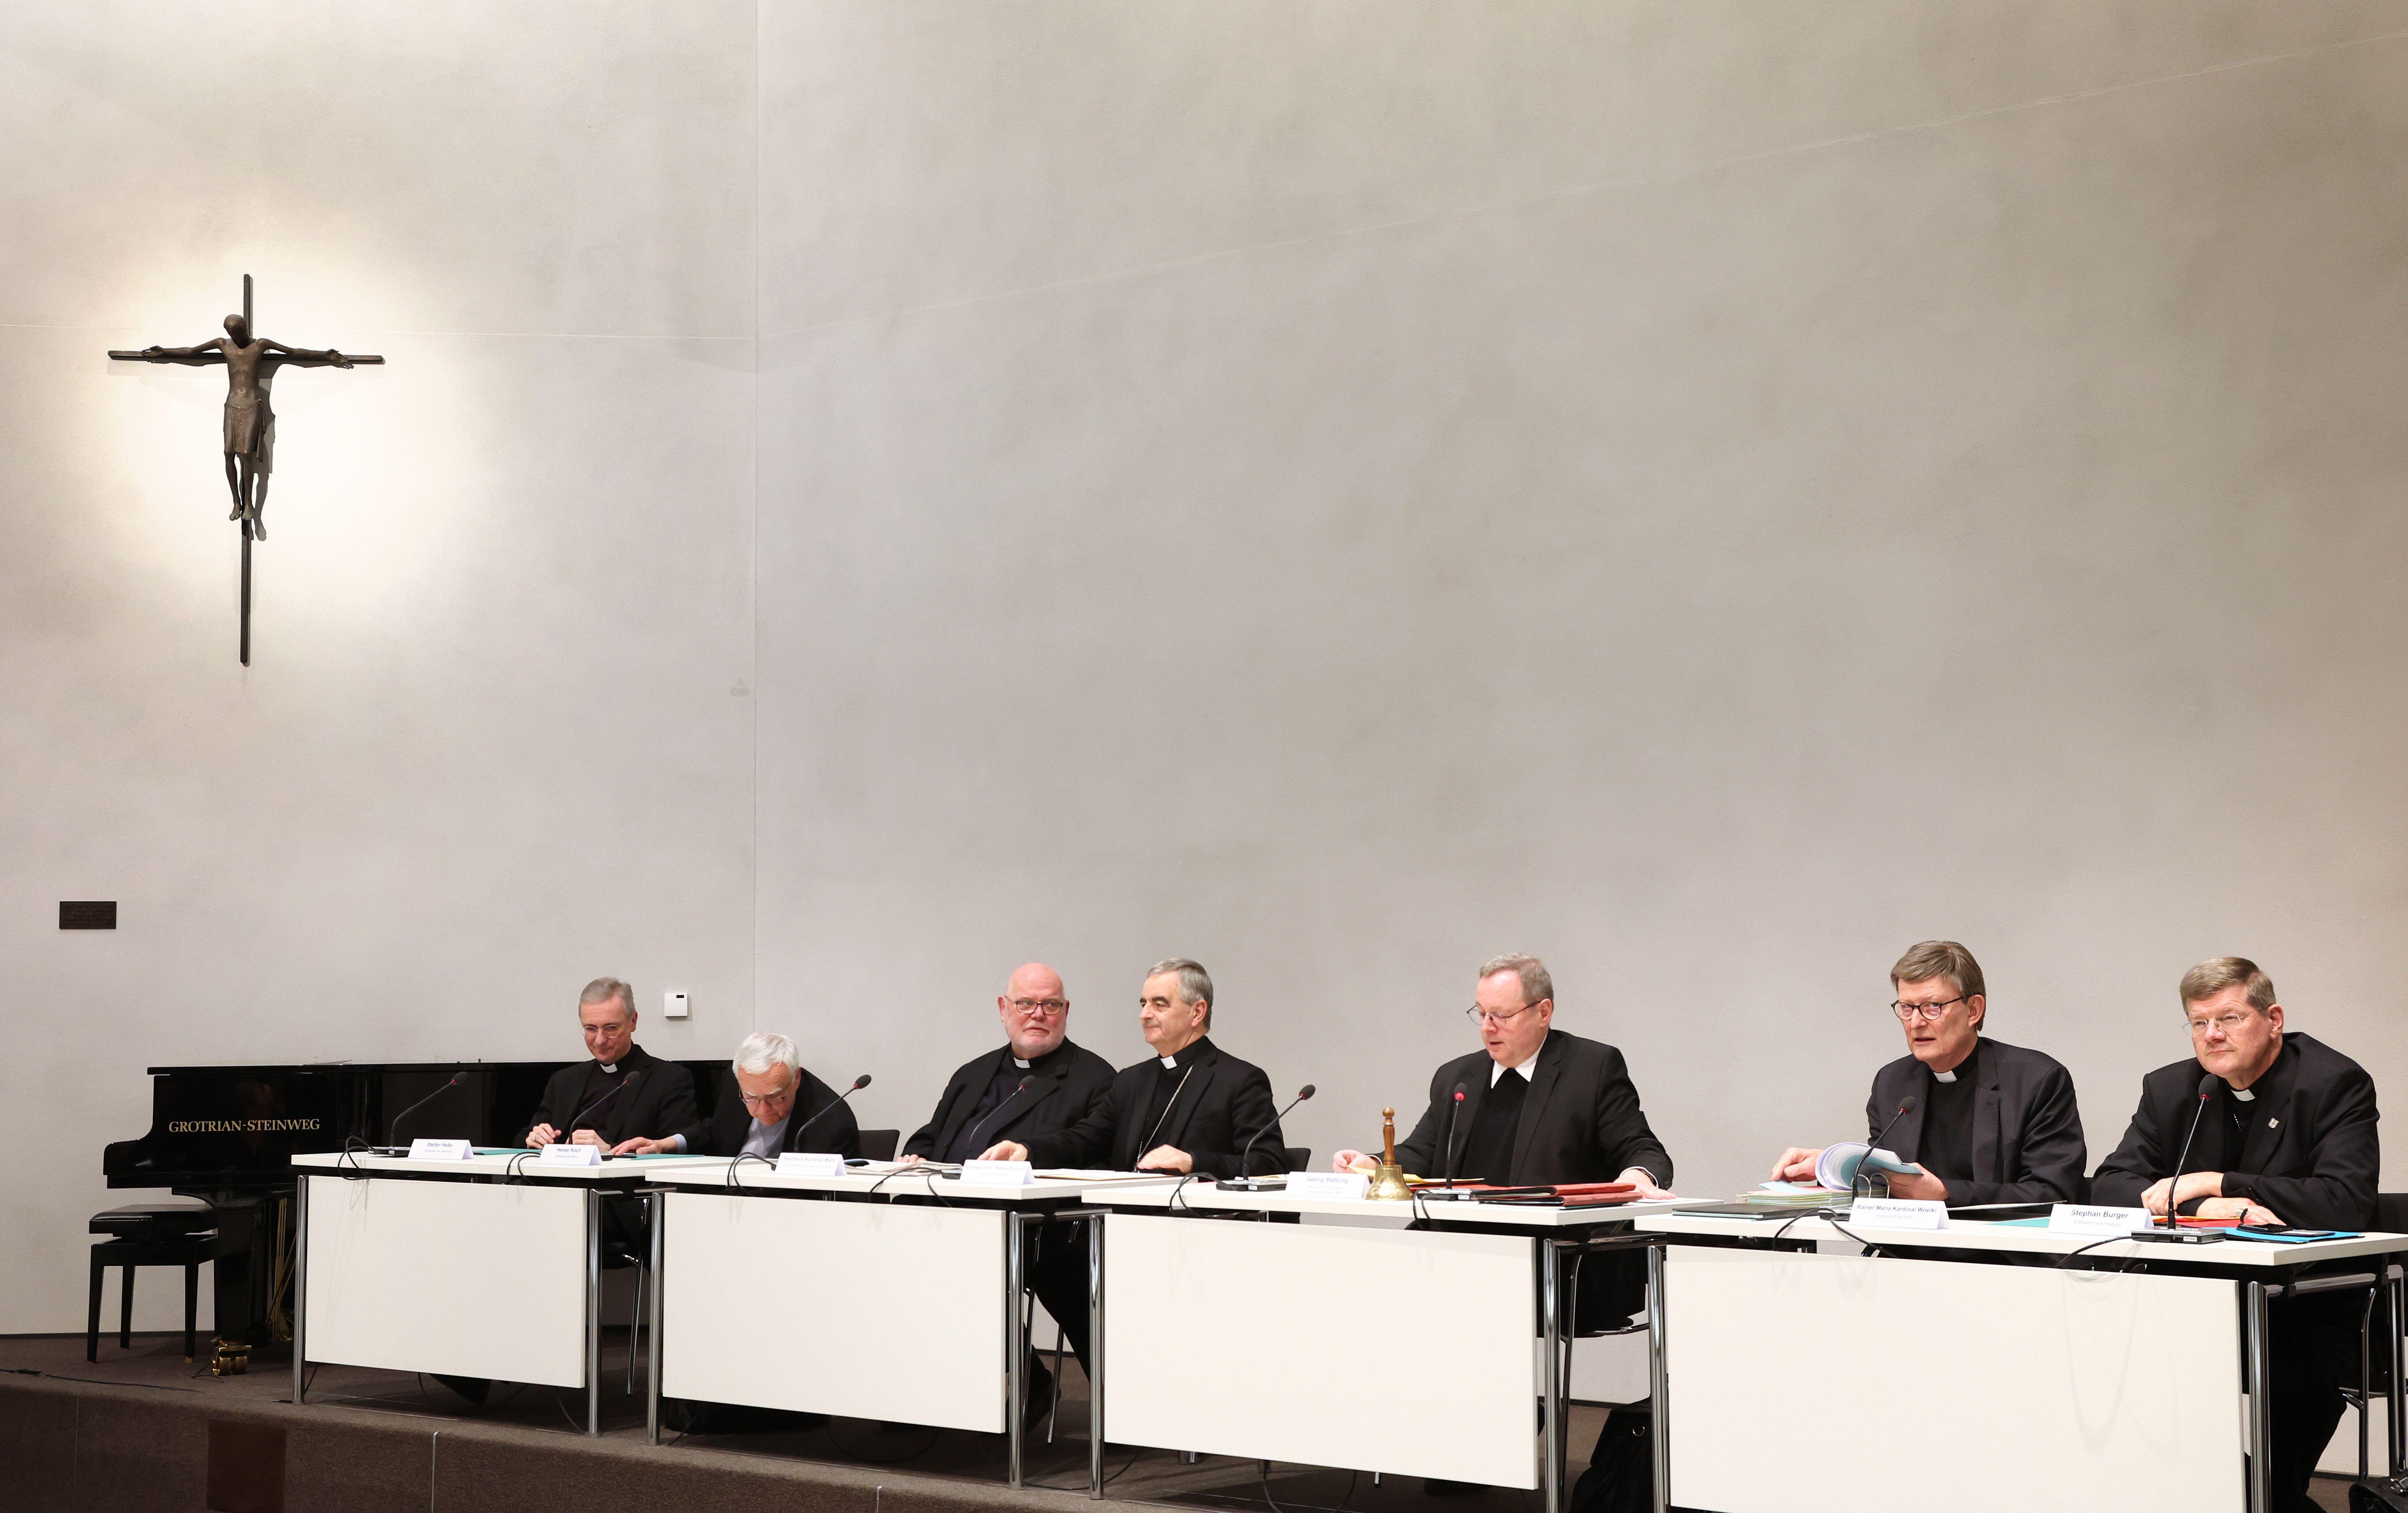 German bishops insist on common ground with Vatican